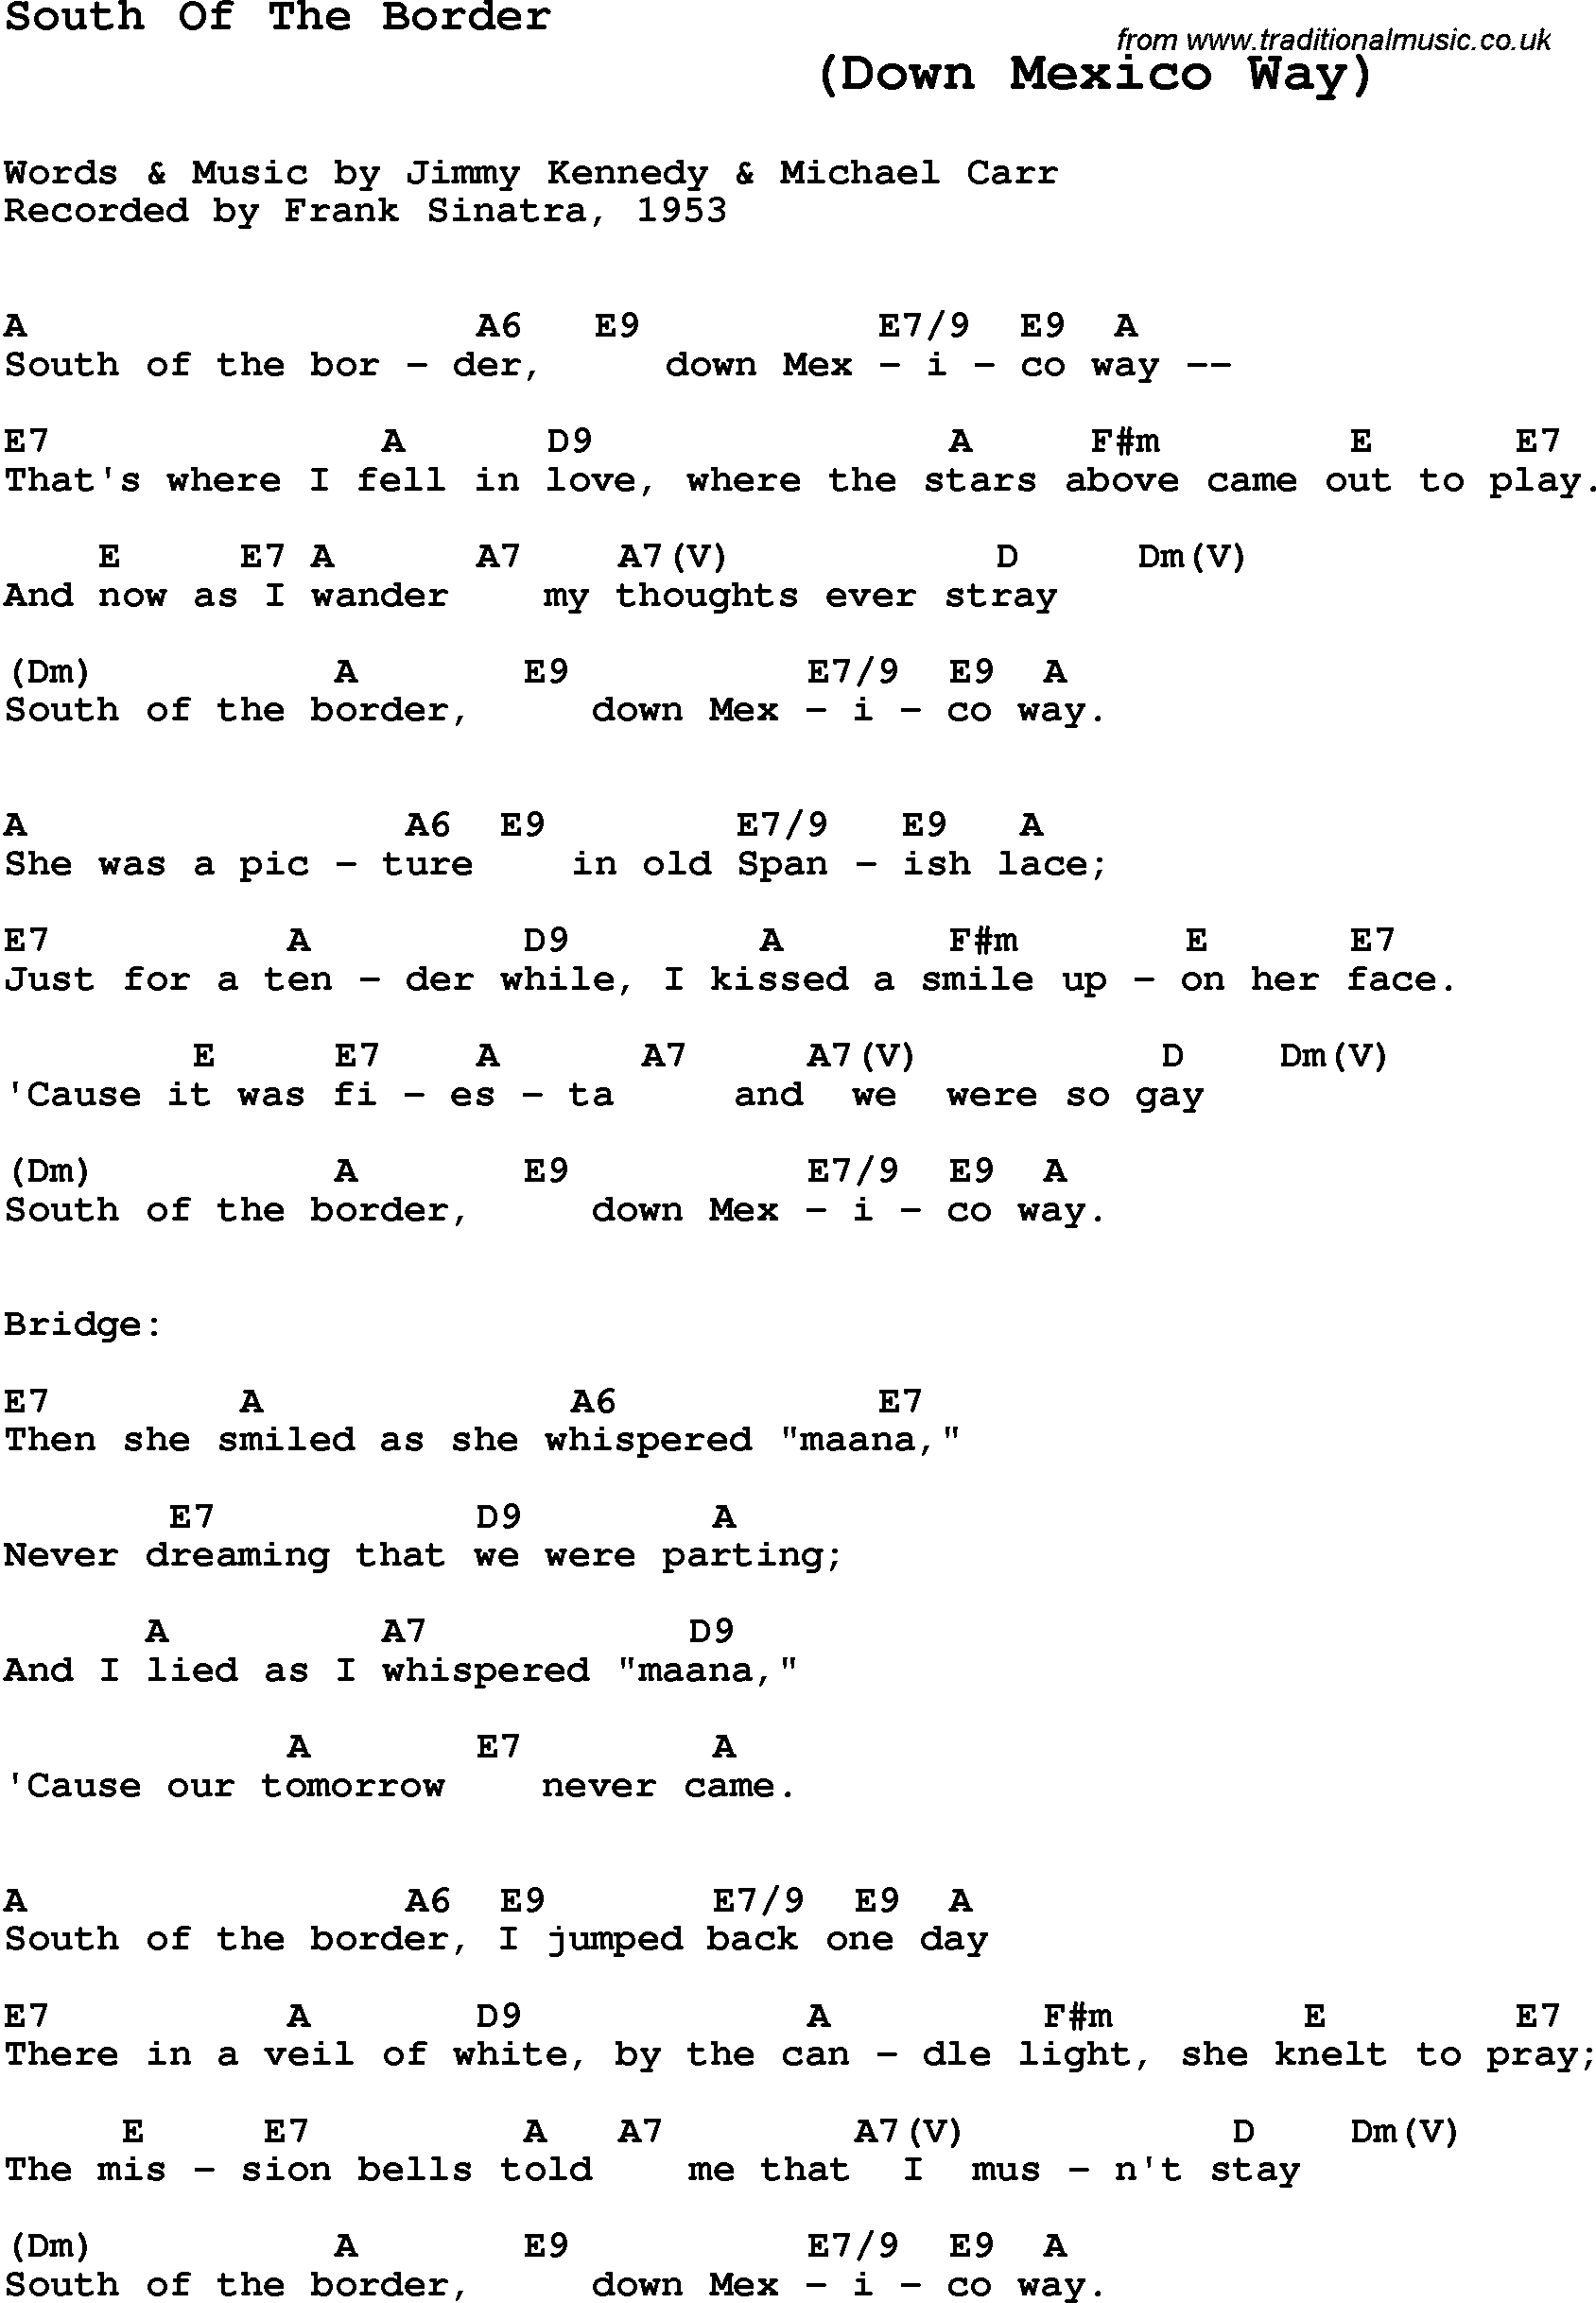 Song Lyrics with guitar chords for South Of The Border - Frank Sinatra, 1953